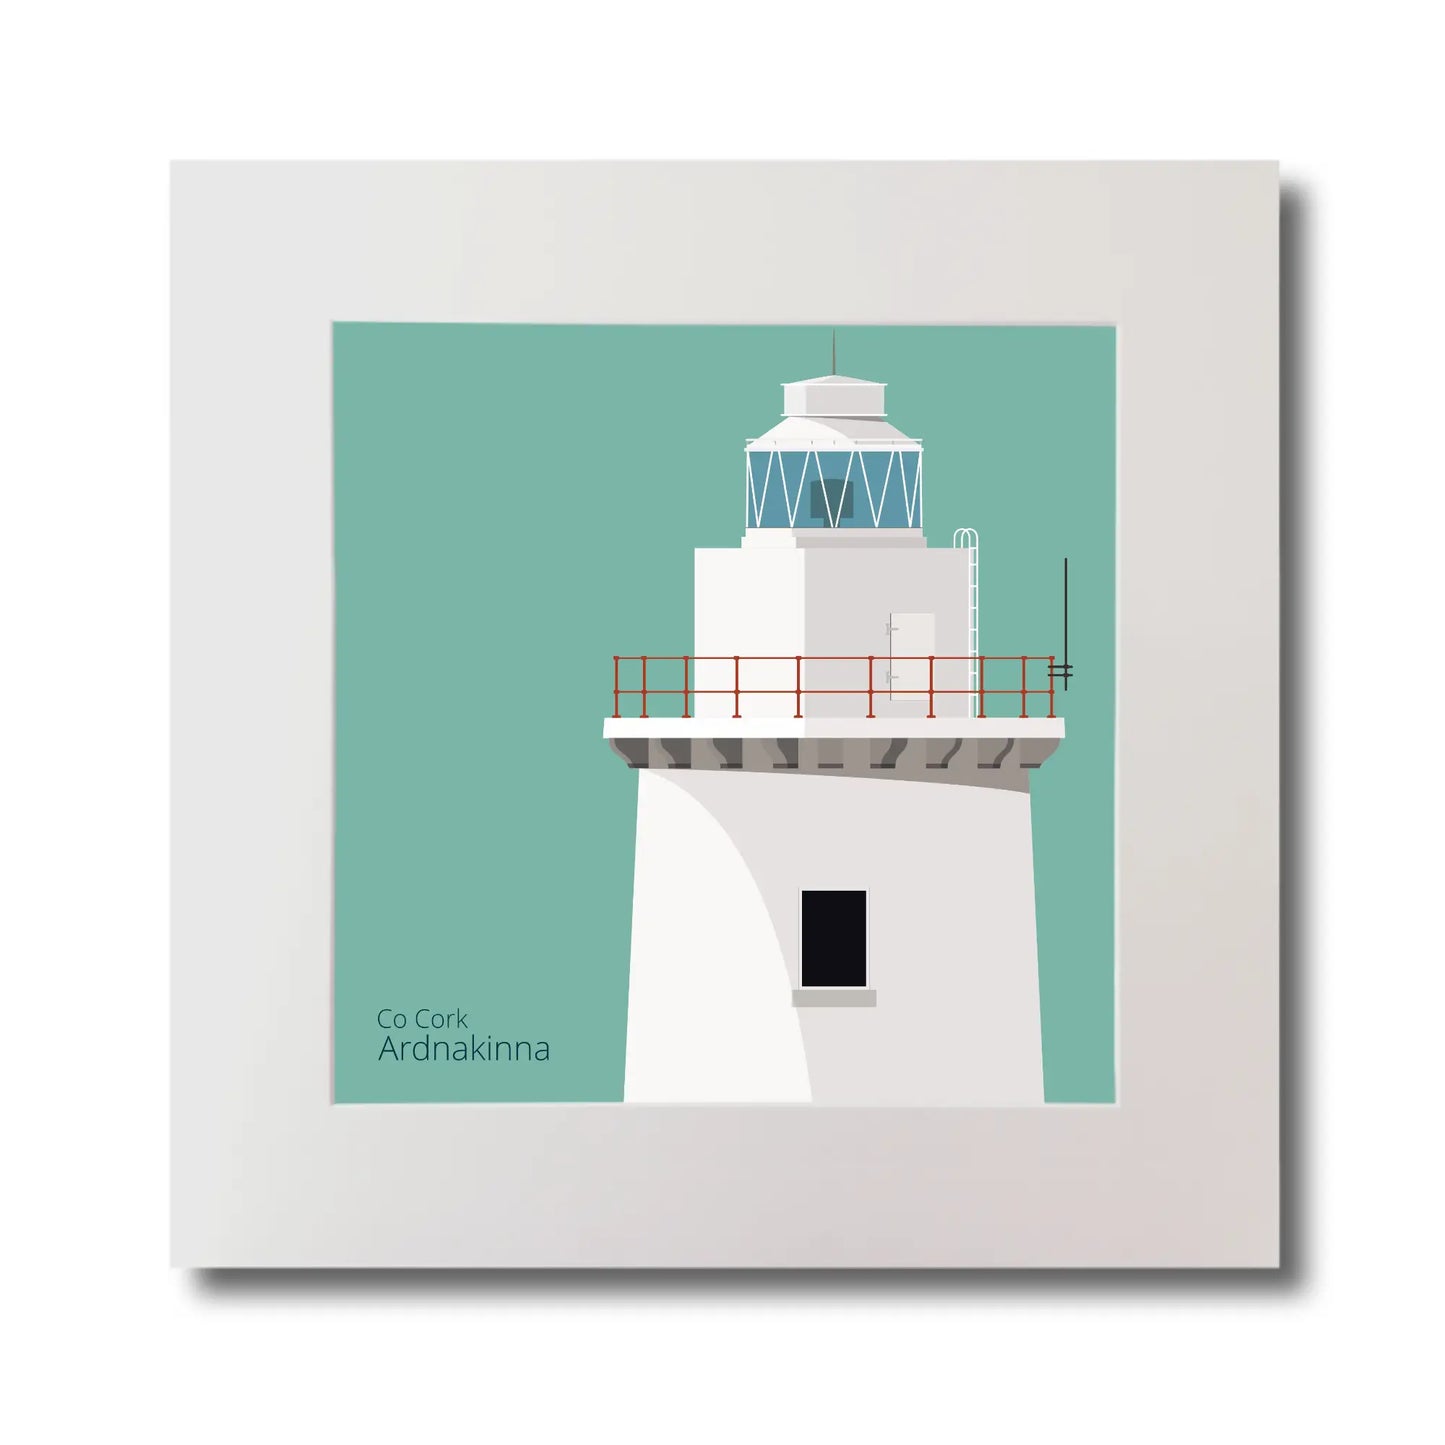 Illustration of Ardnakinna lighthouse on an ocean green background, mounted and measuring 30x30cm.